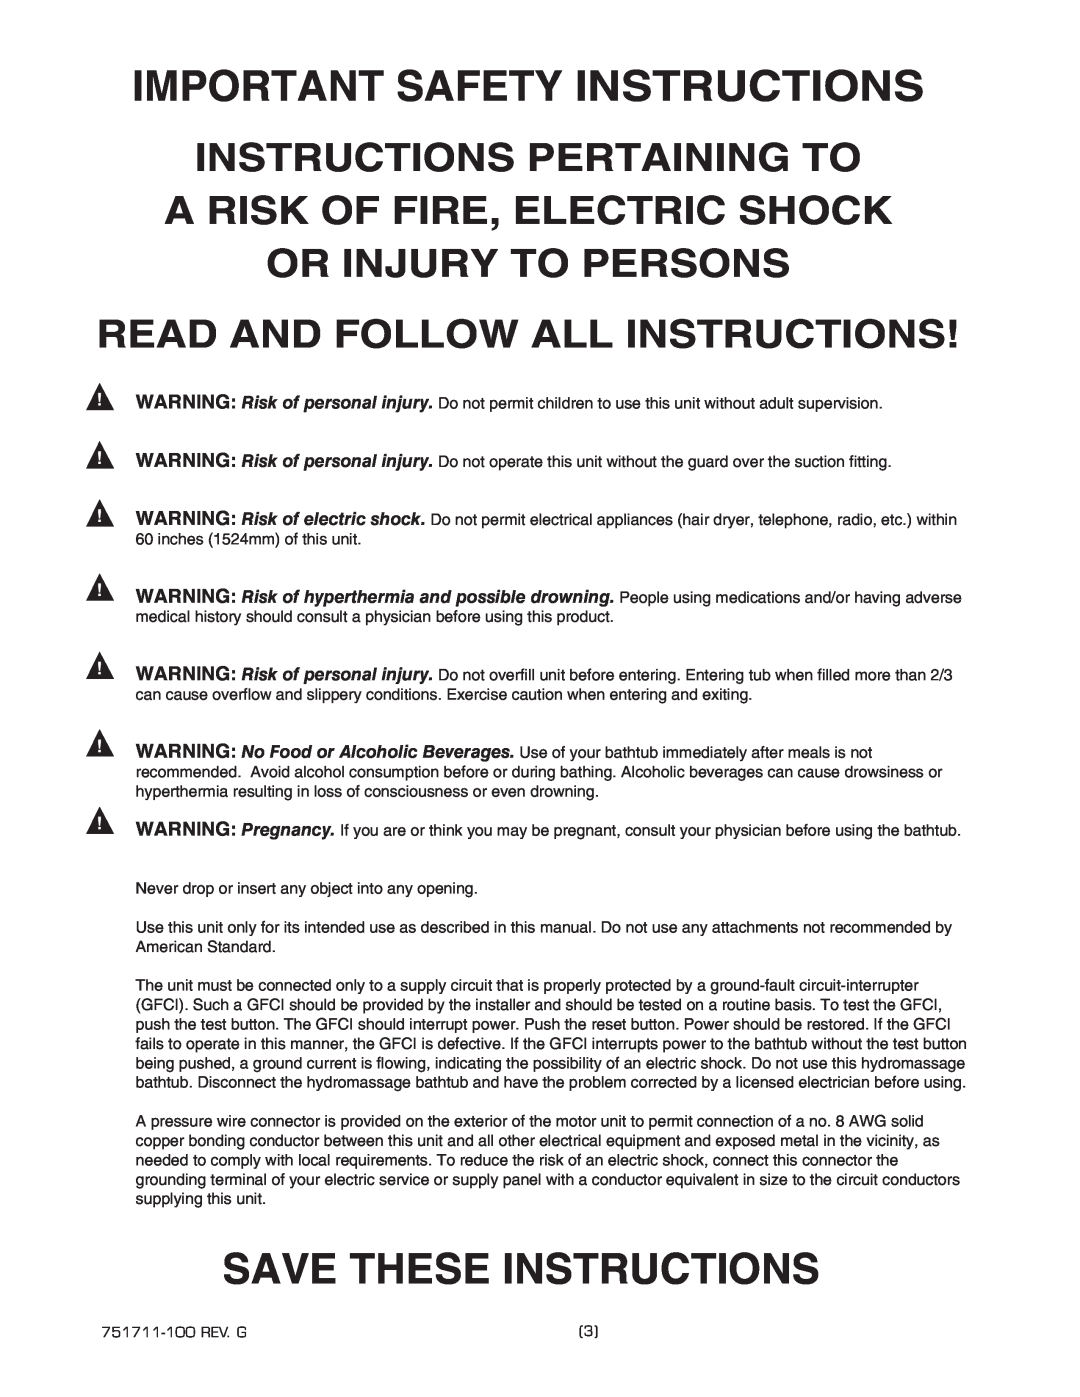 American Standard 751711-100 Important Safety Instructions, Save These Instructions, Read And Follow All Instructions 